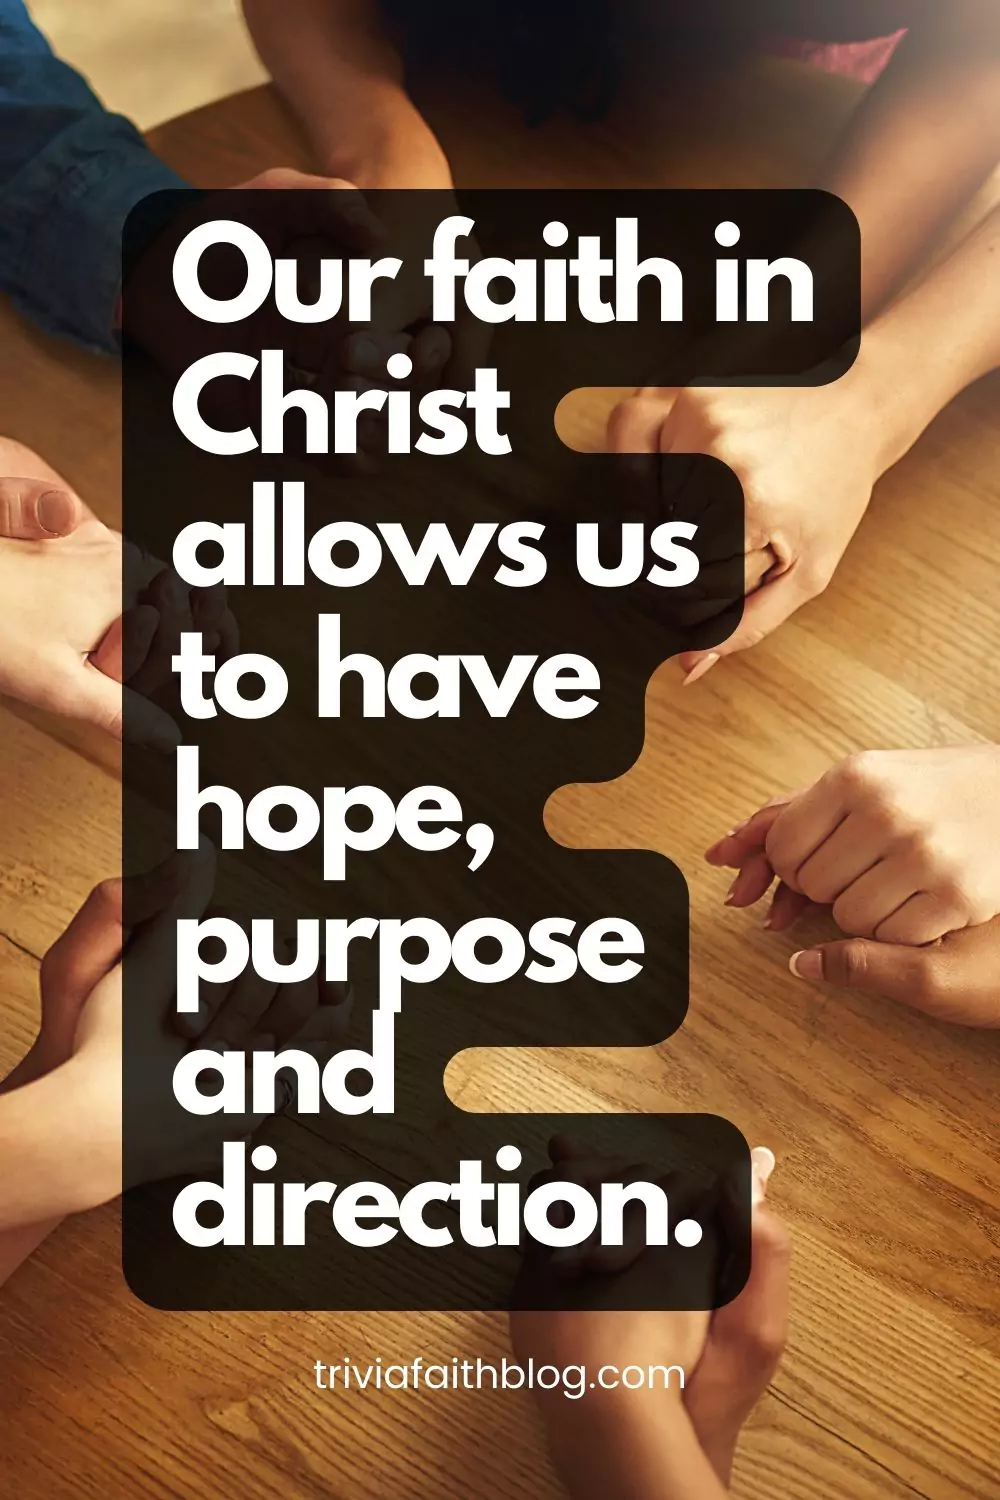 Our faith in Christ allows us to have hope, purpose and direction.